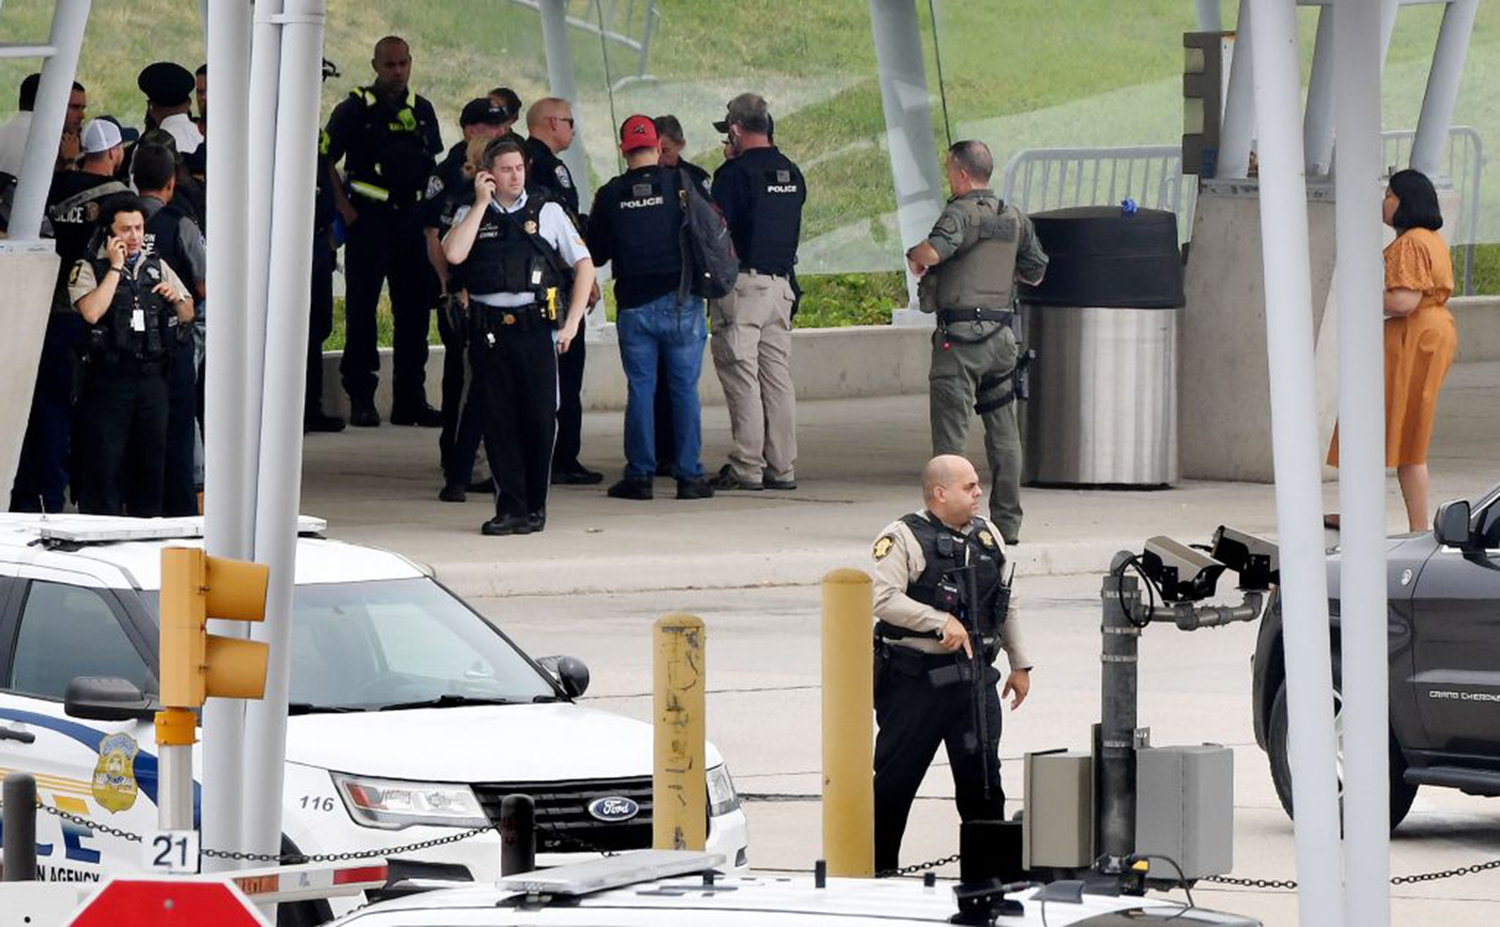 Law enforcement officers are seen near the entrance of the Pentagon after a report of an active shooter and lockdown in Washington, DC on August 3, 2021.  (Olivier Douliery/AFP via Getty Images/TNS)